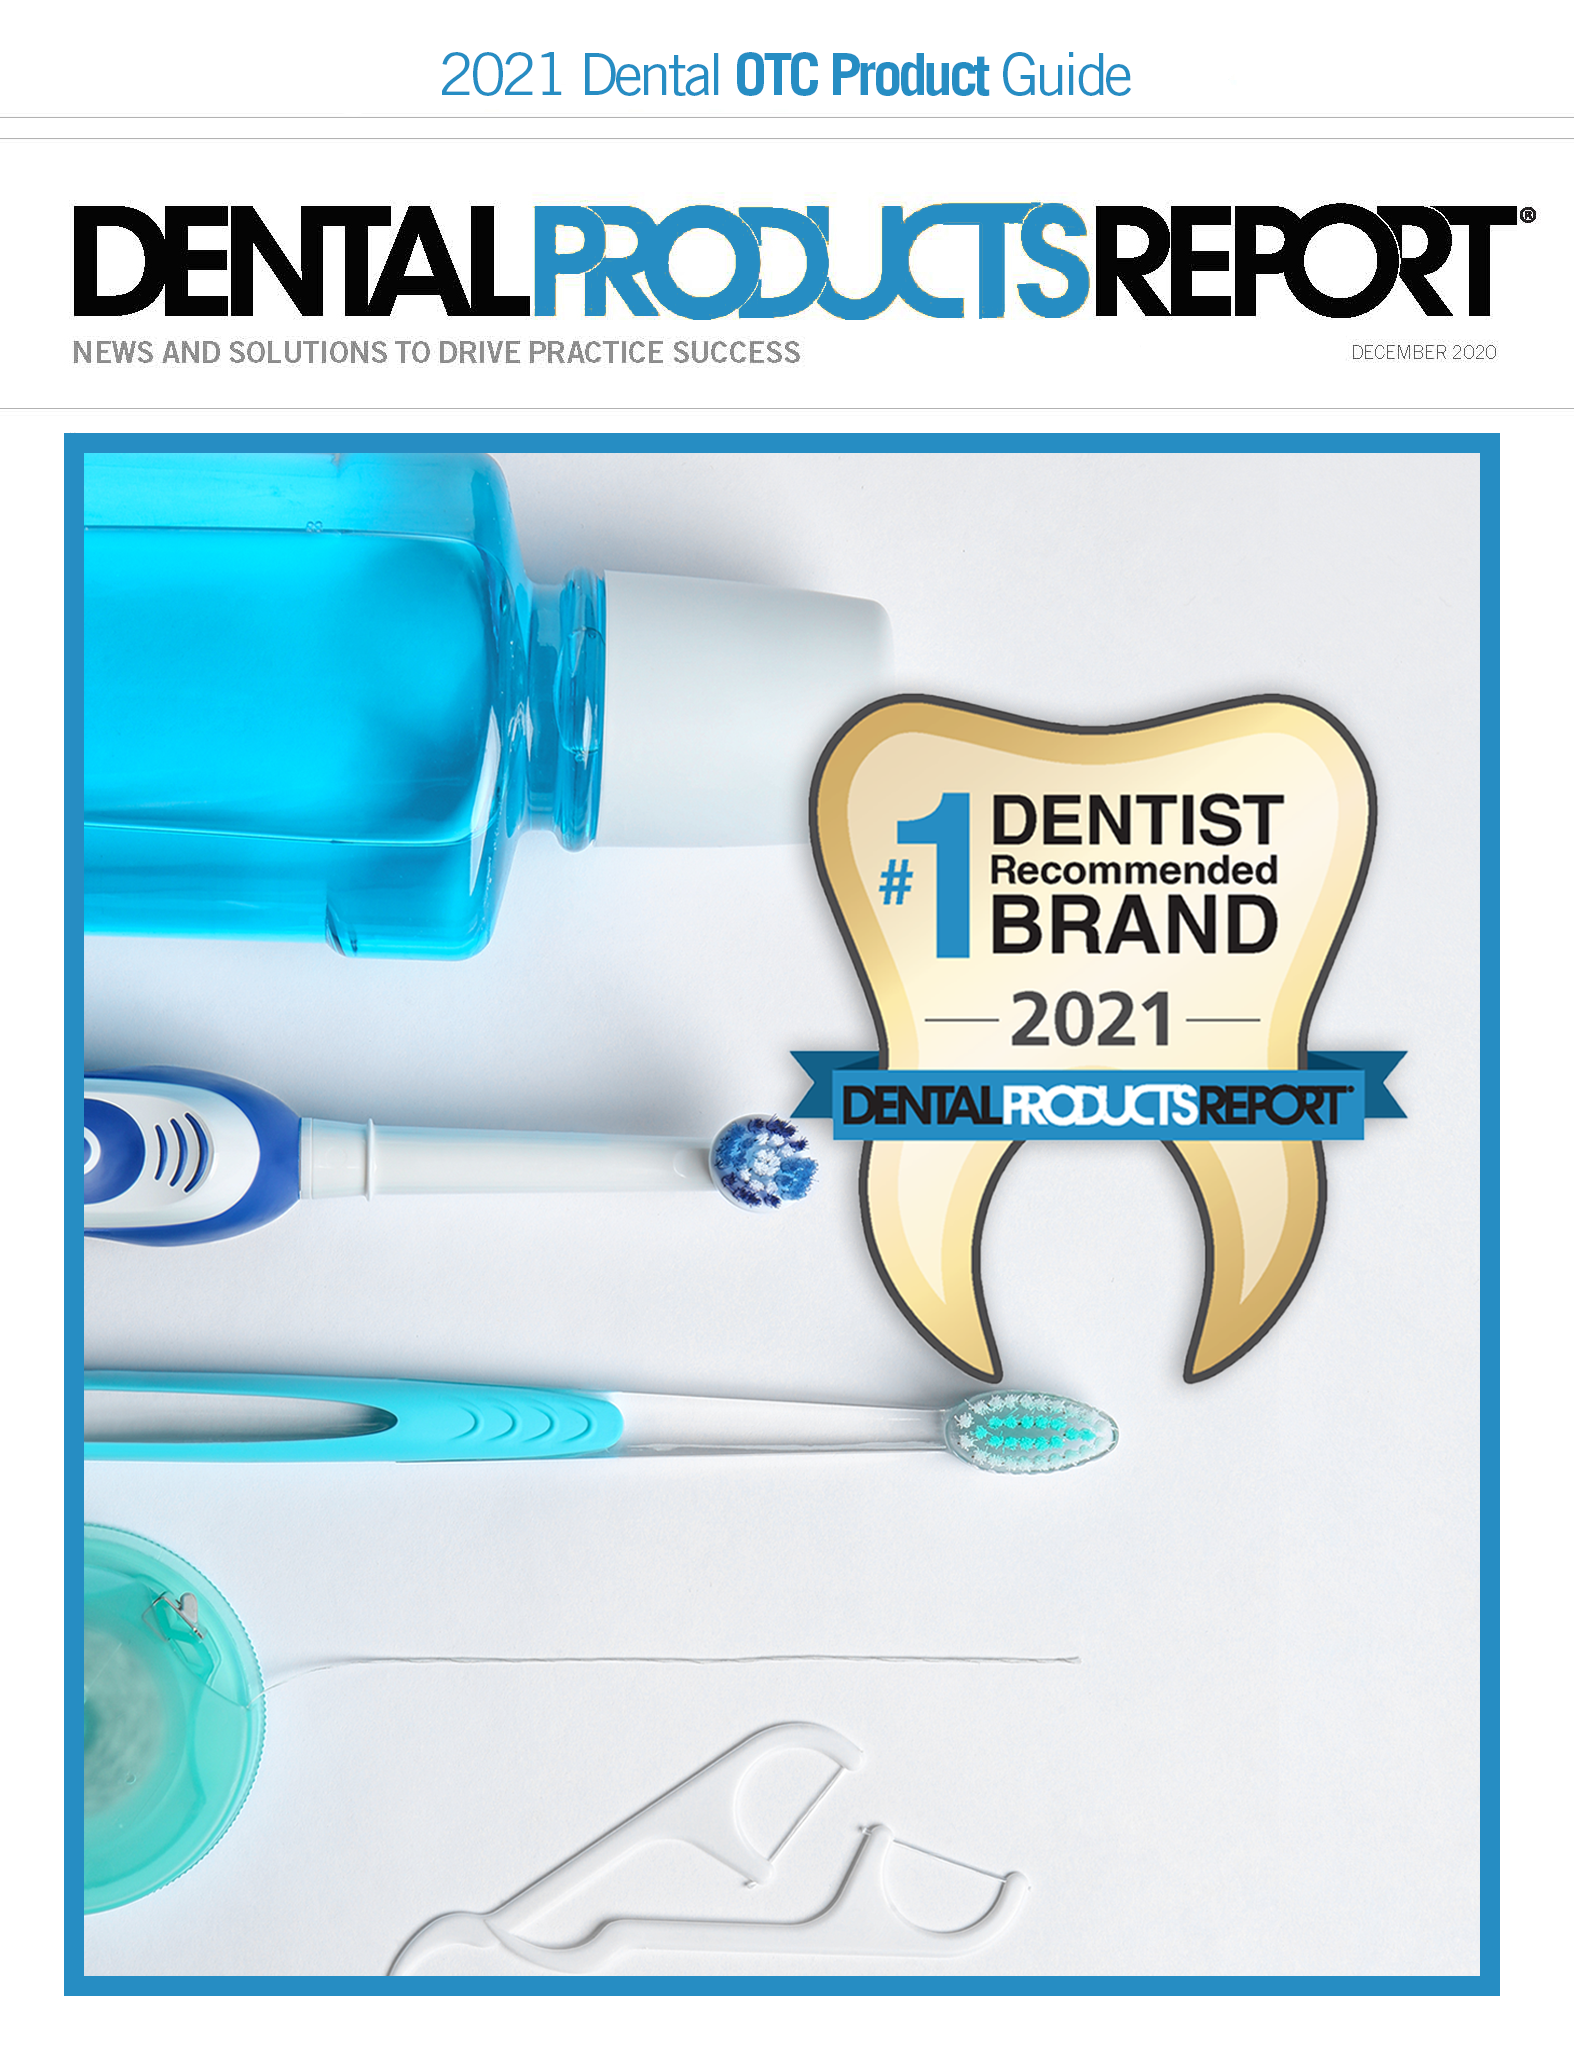 Dental Products Report 2021 Dental OTC Products Guide